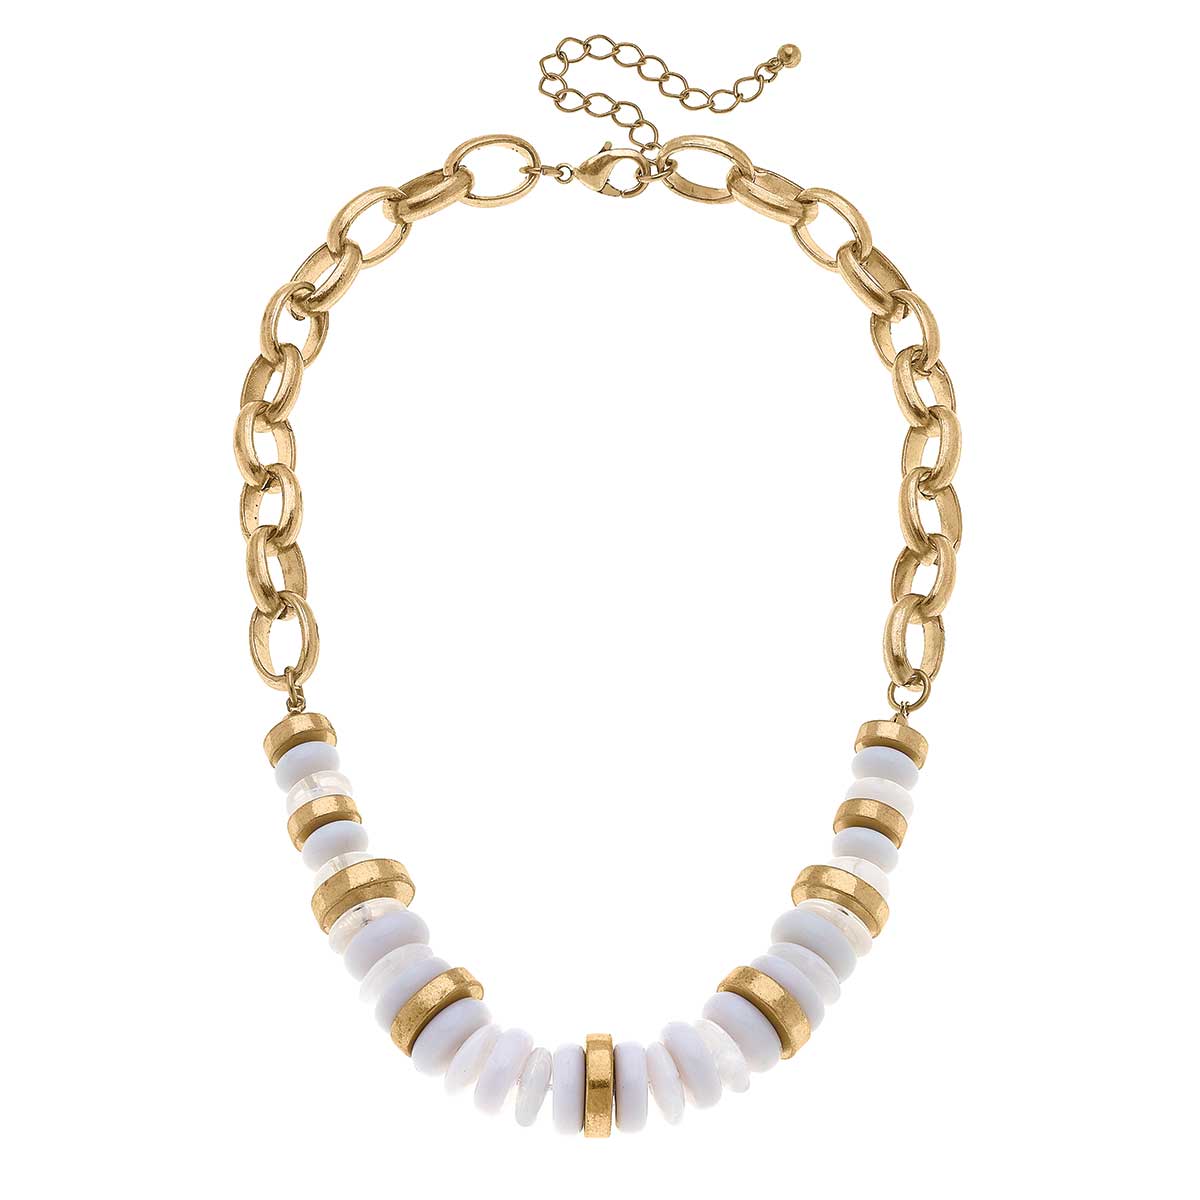 Peyton Beaded Resin Chain Link Necklace in White